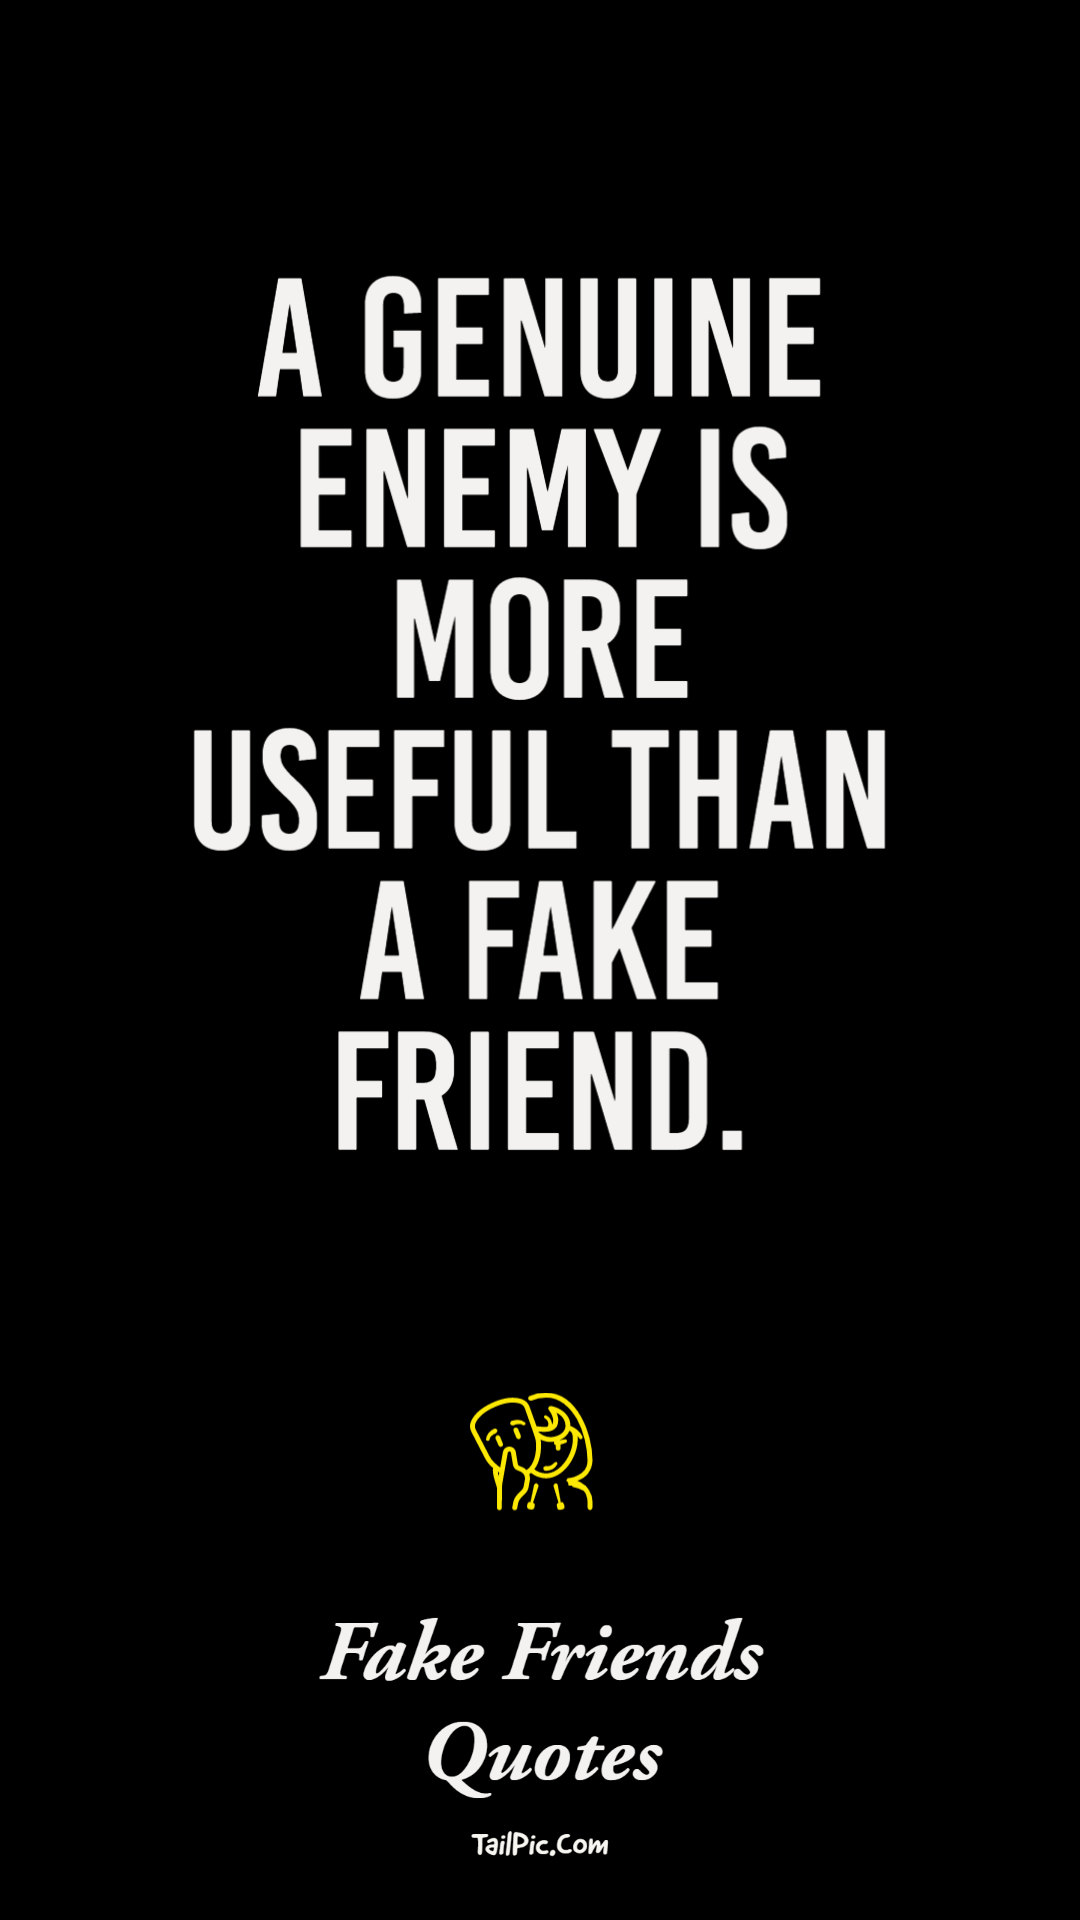 fake friends quotes about friendship that hurts